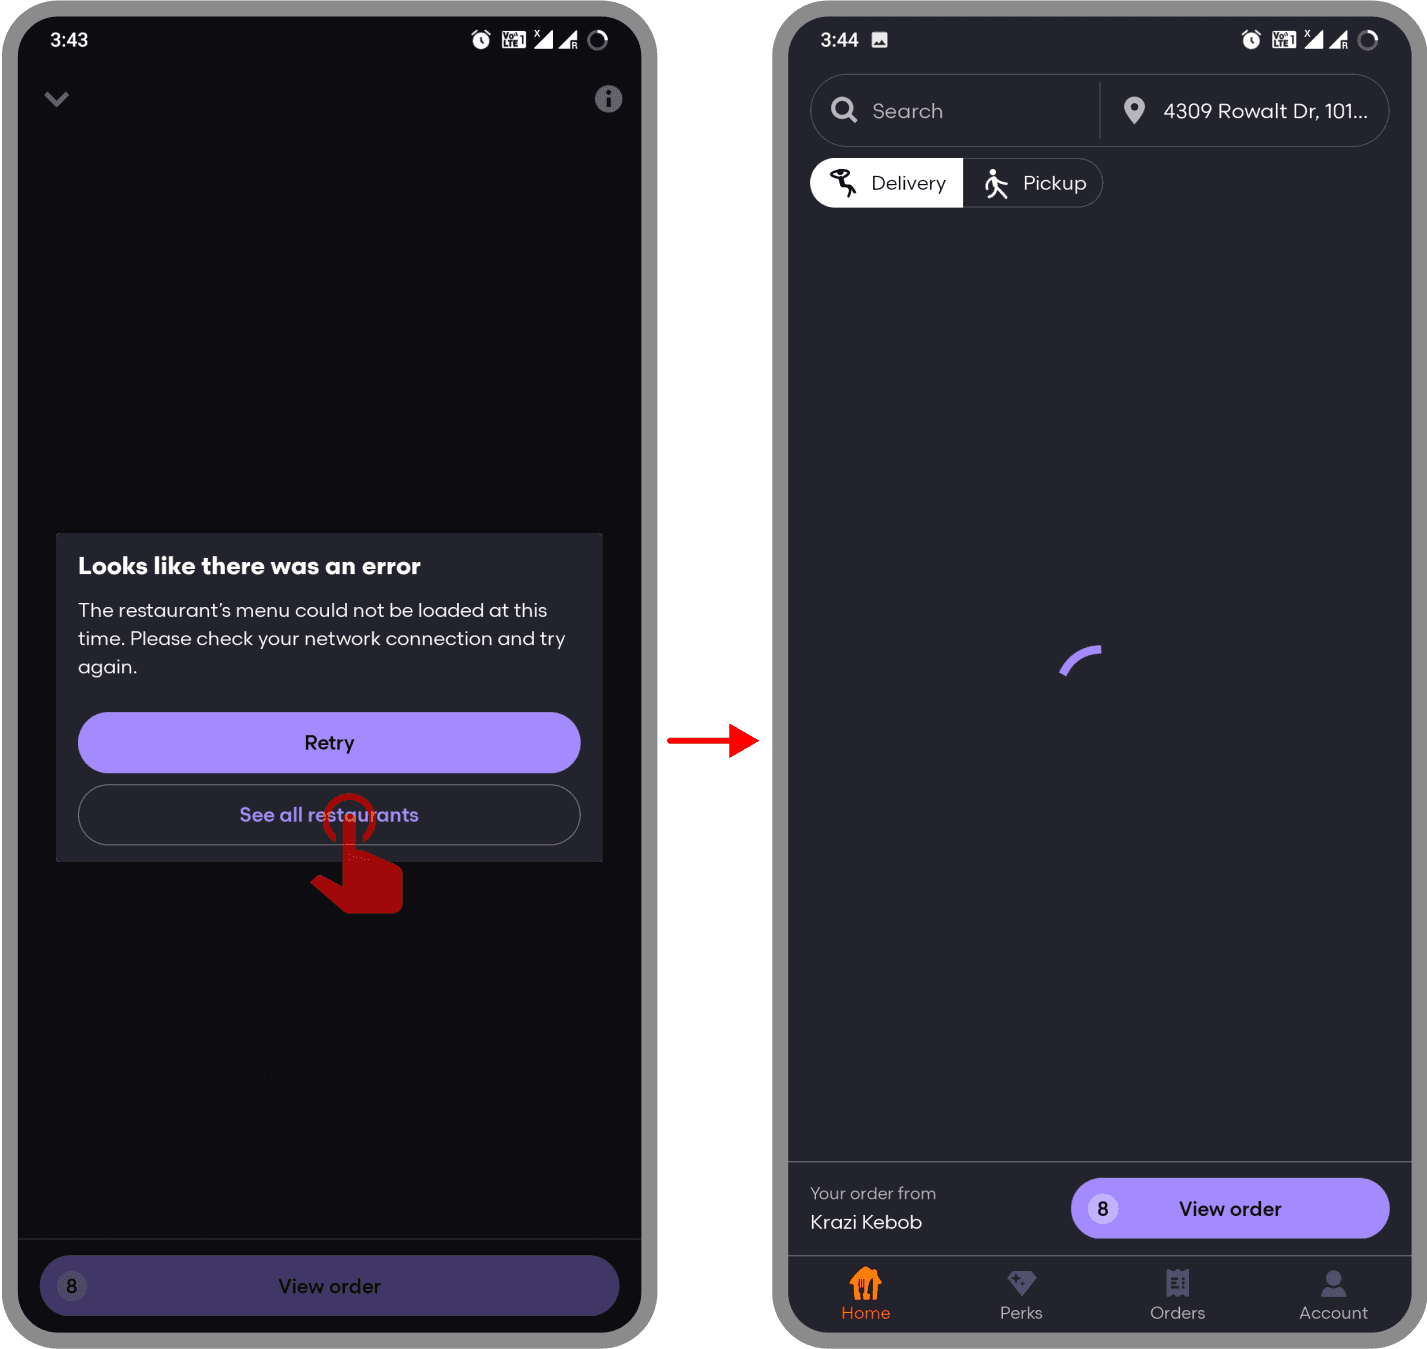 App screens depicting the error screen interaction when there is no internet connection.